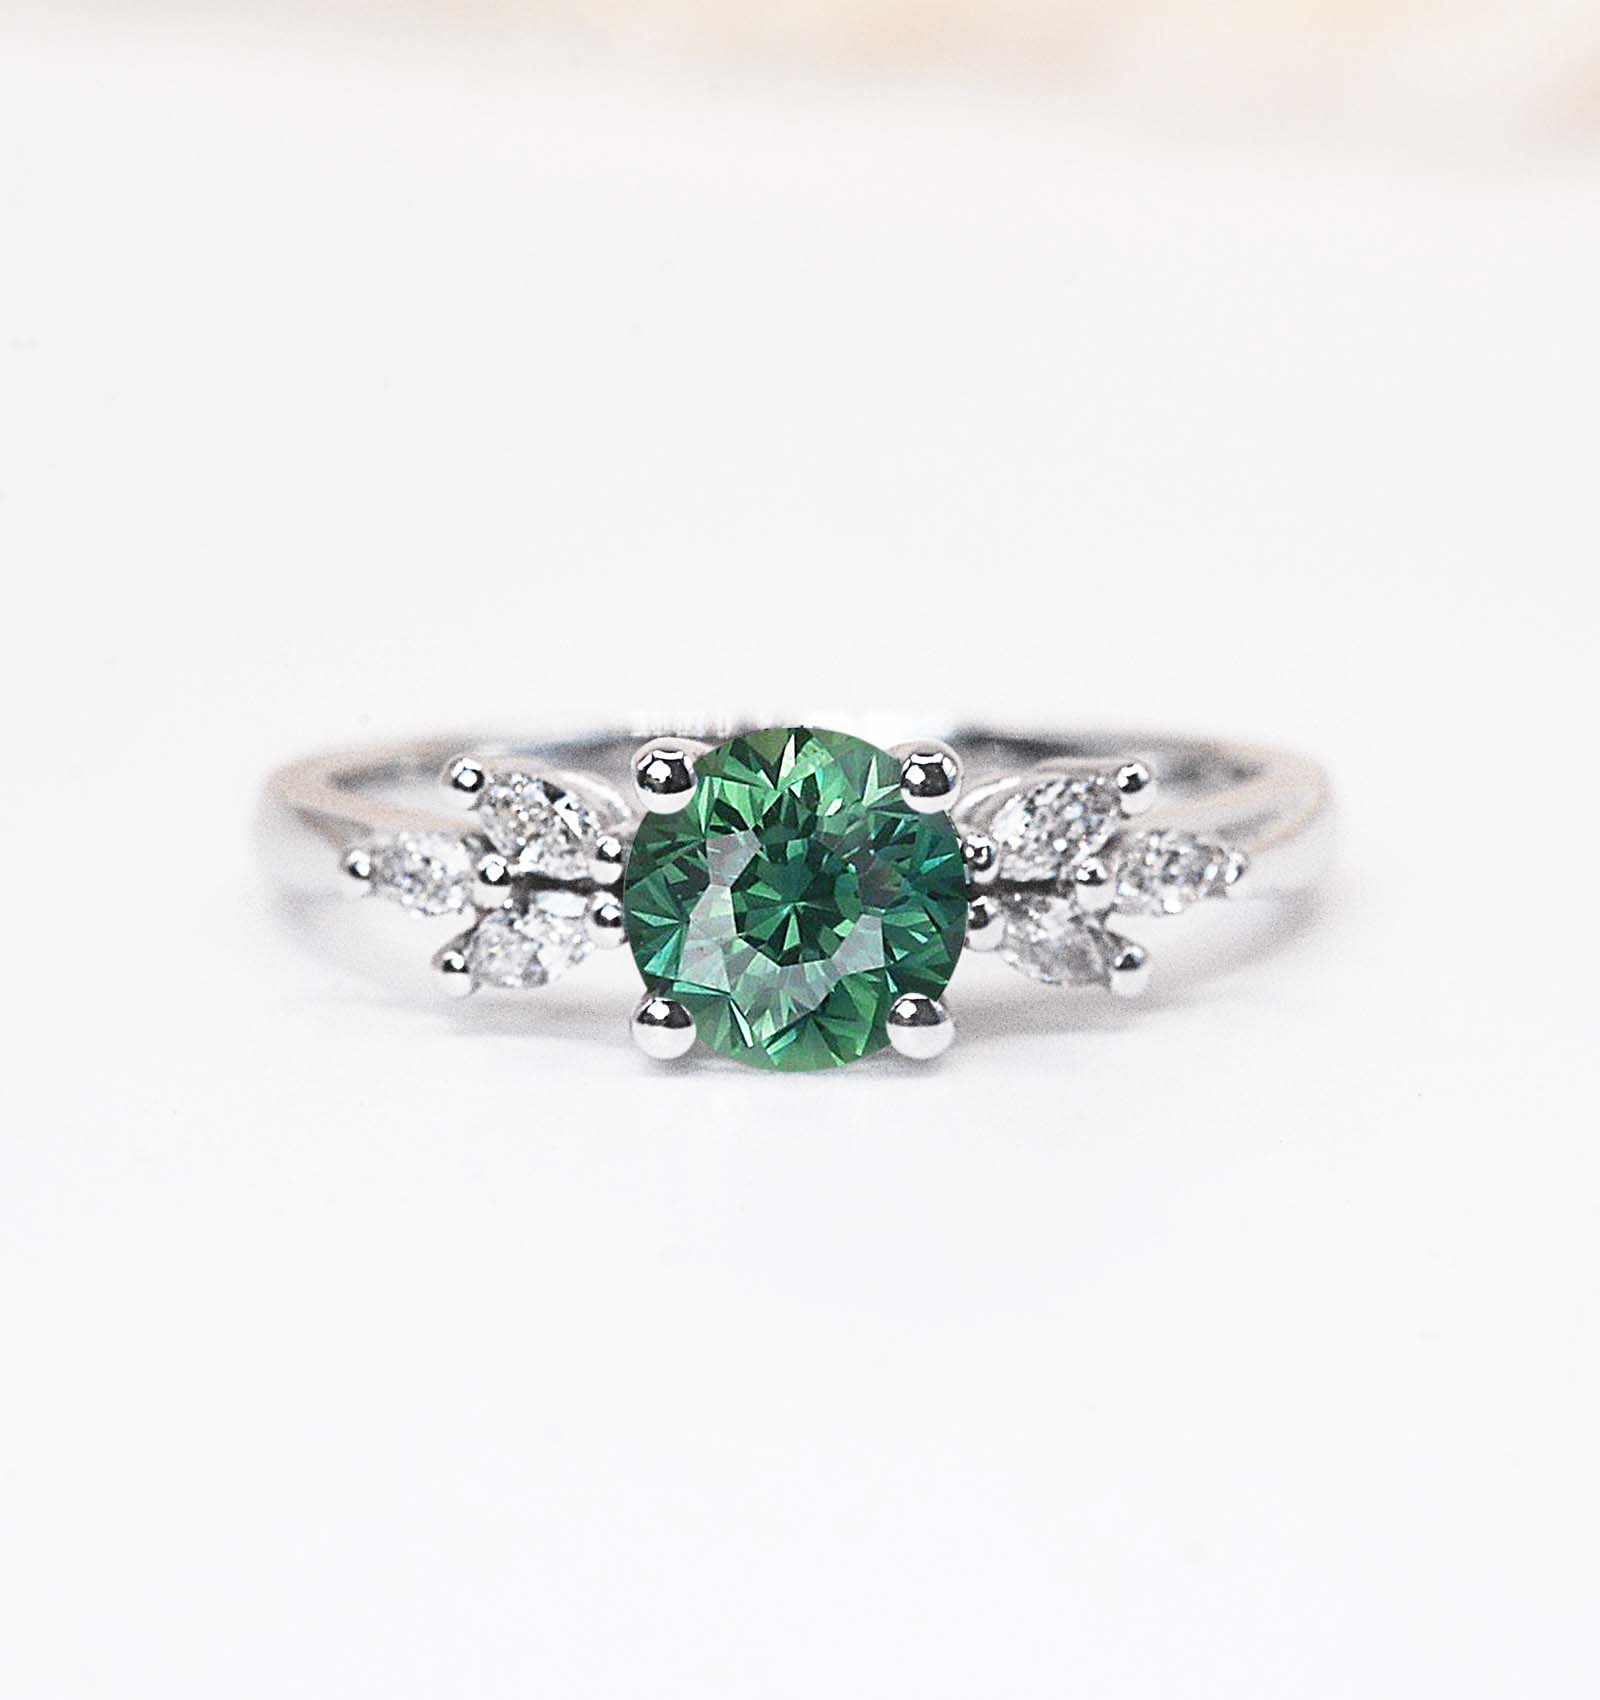 1.0ct mint green sapphire dainty engagement ring